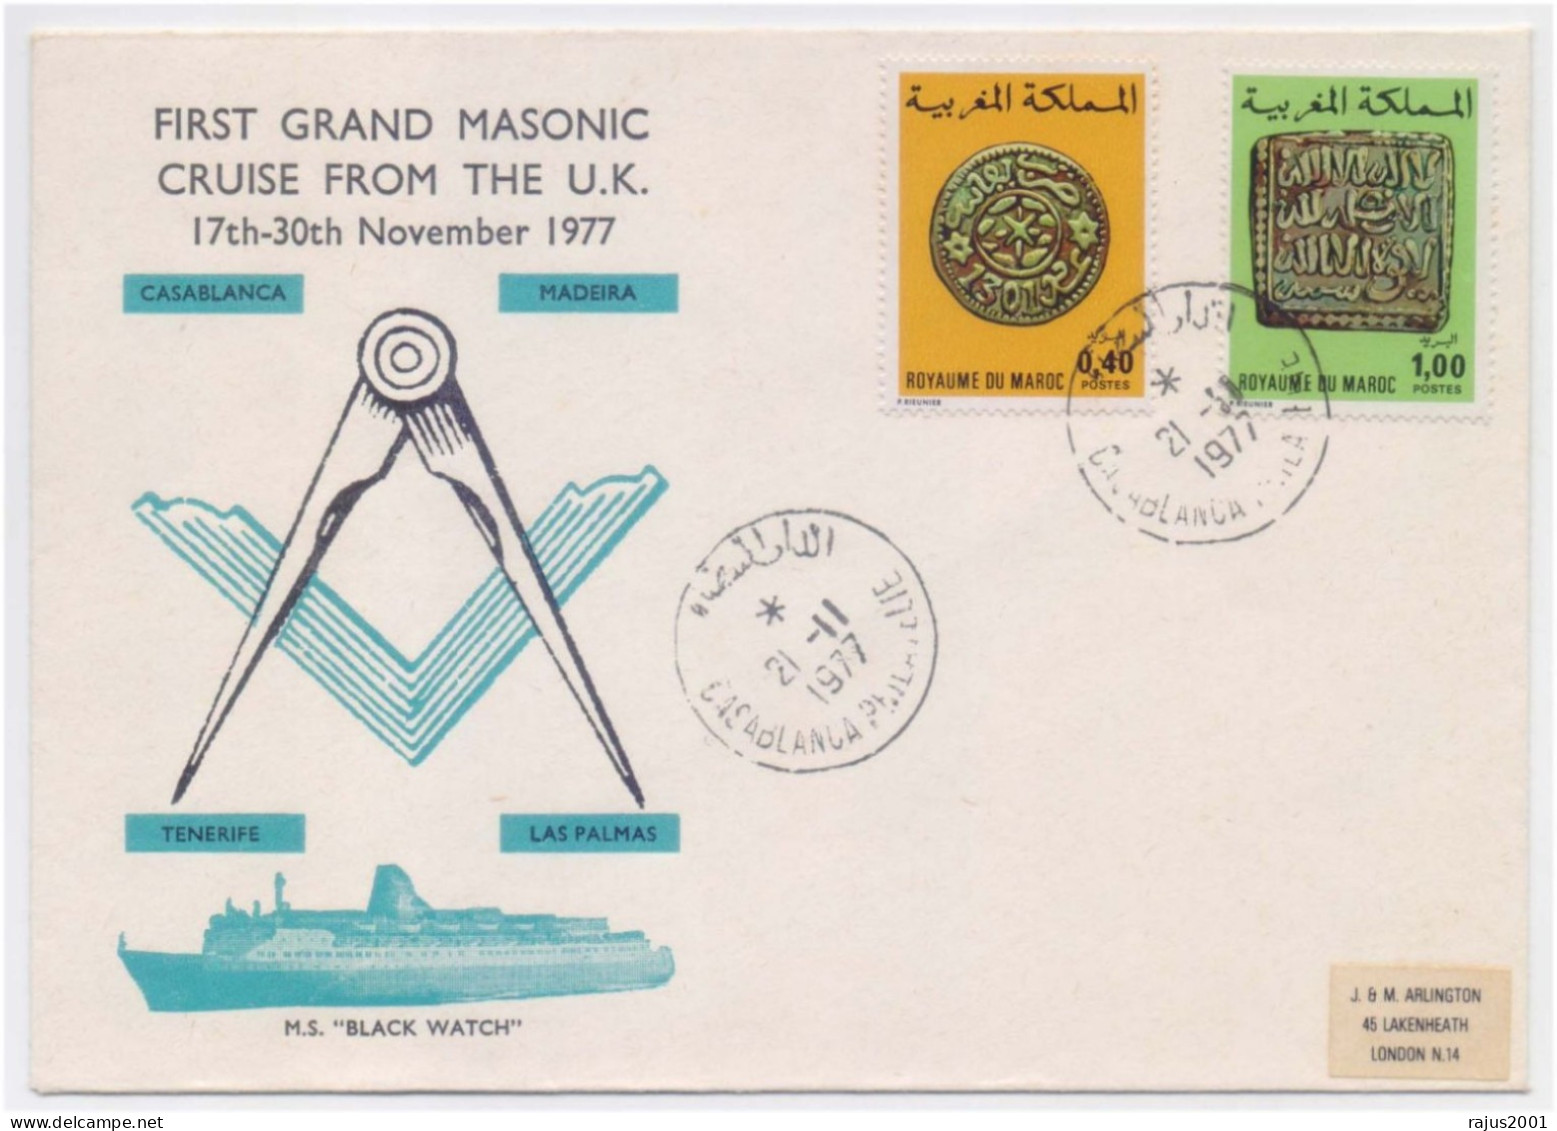 First Grand Masonic Cruise From The U.K. M.S. Black Watch, Coinage, Coin, Freemasonry Masonic Morocco FDC - Franc-Maçonnerie